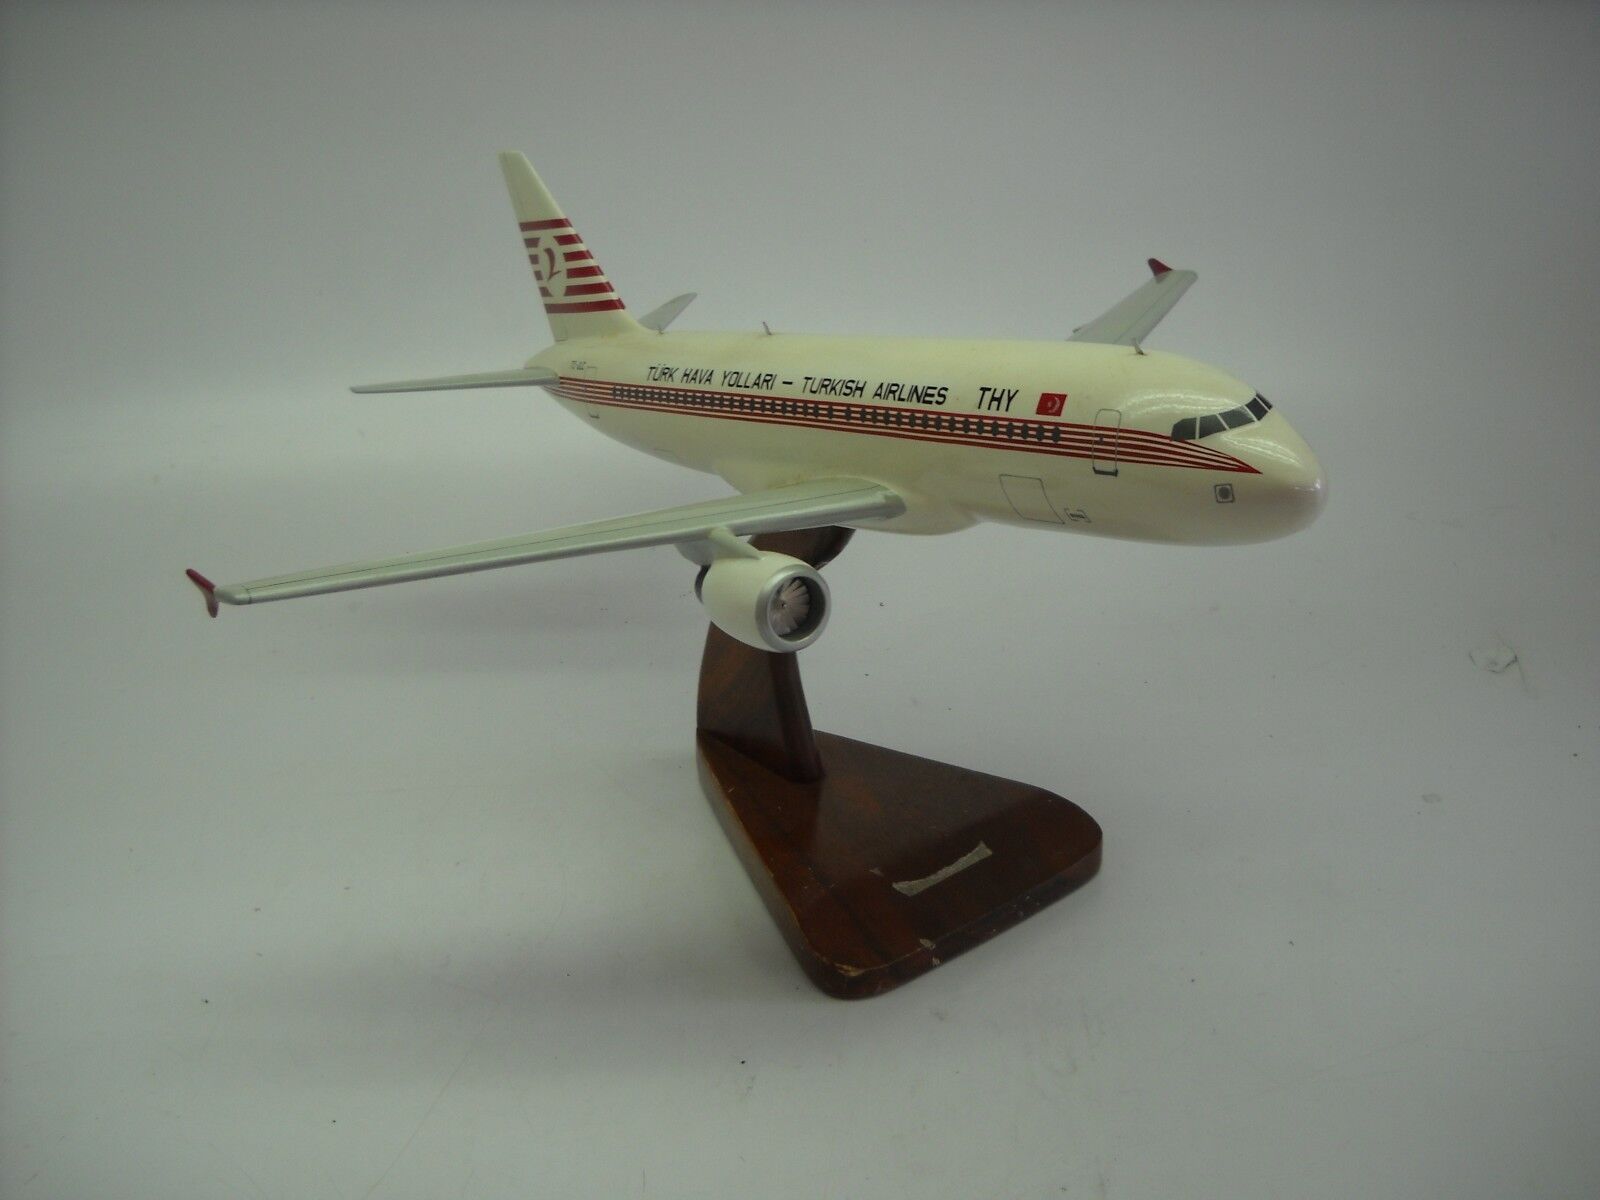 A-320 Turkish Airlines Airplane Wood Model Replica 